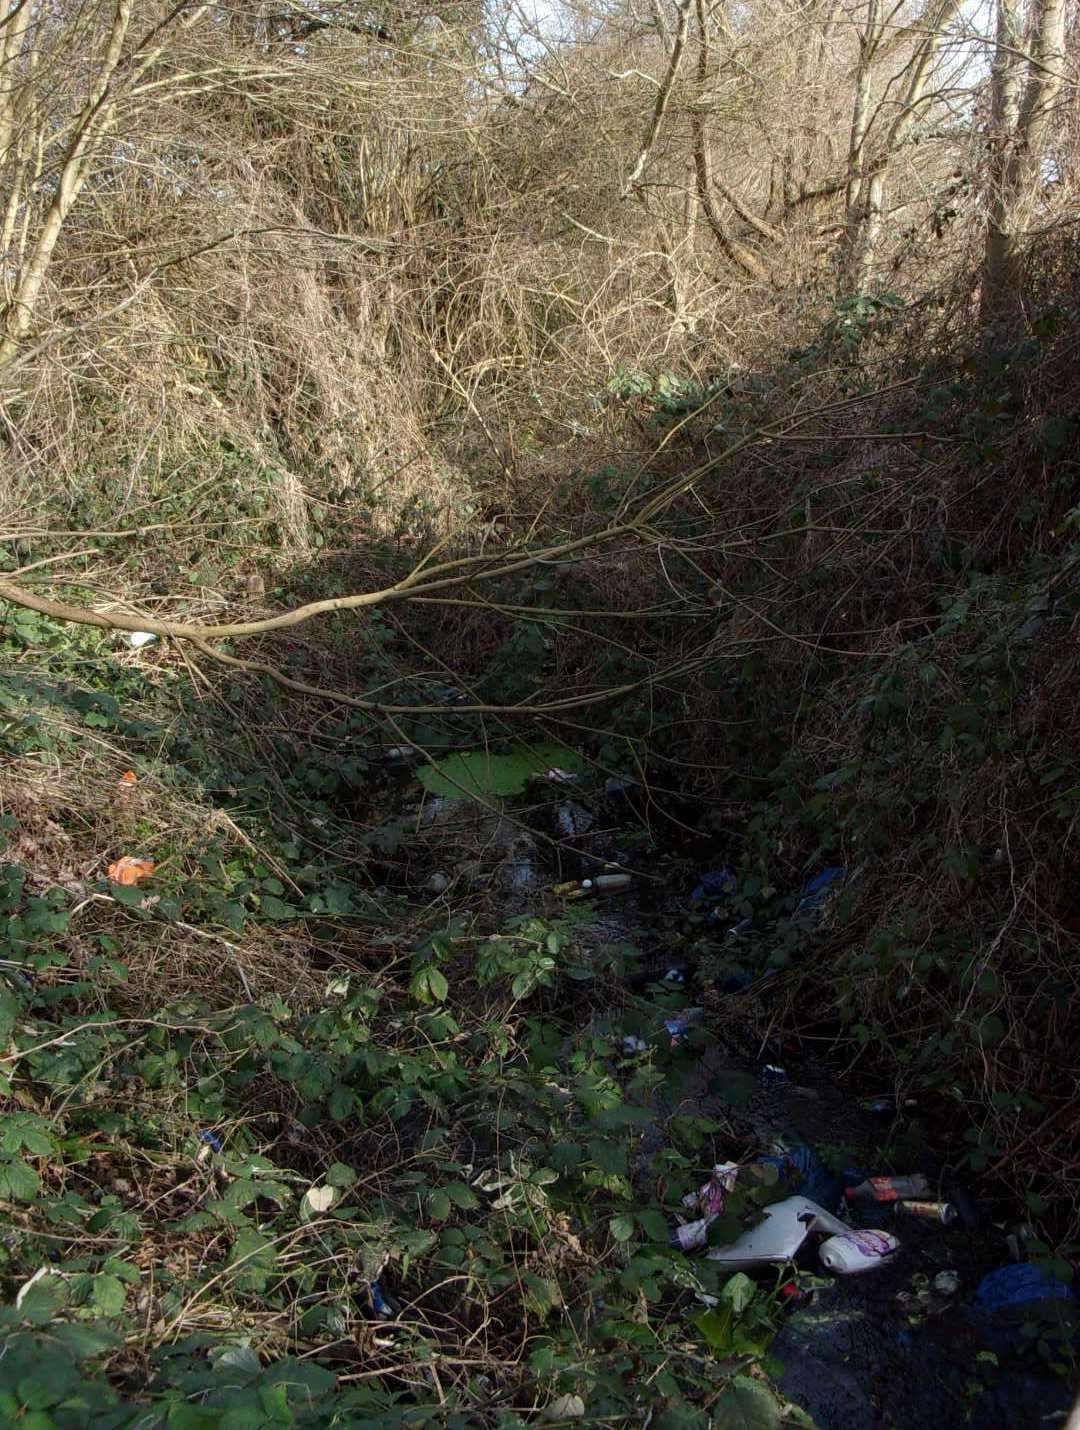 The once litter-strewn Cooksditch Stream in Faversham